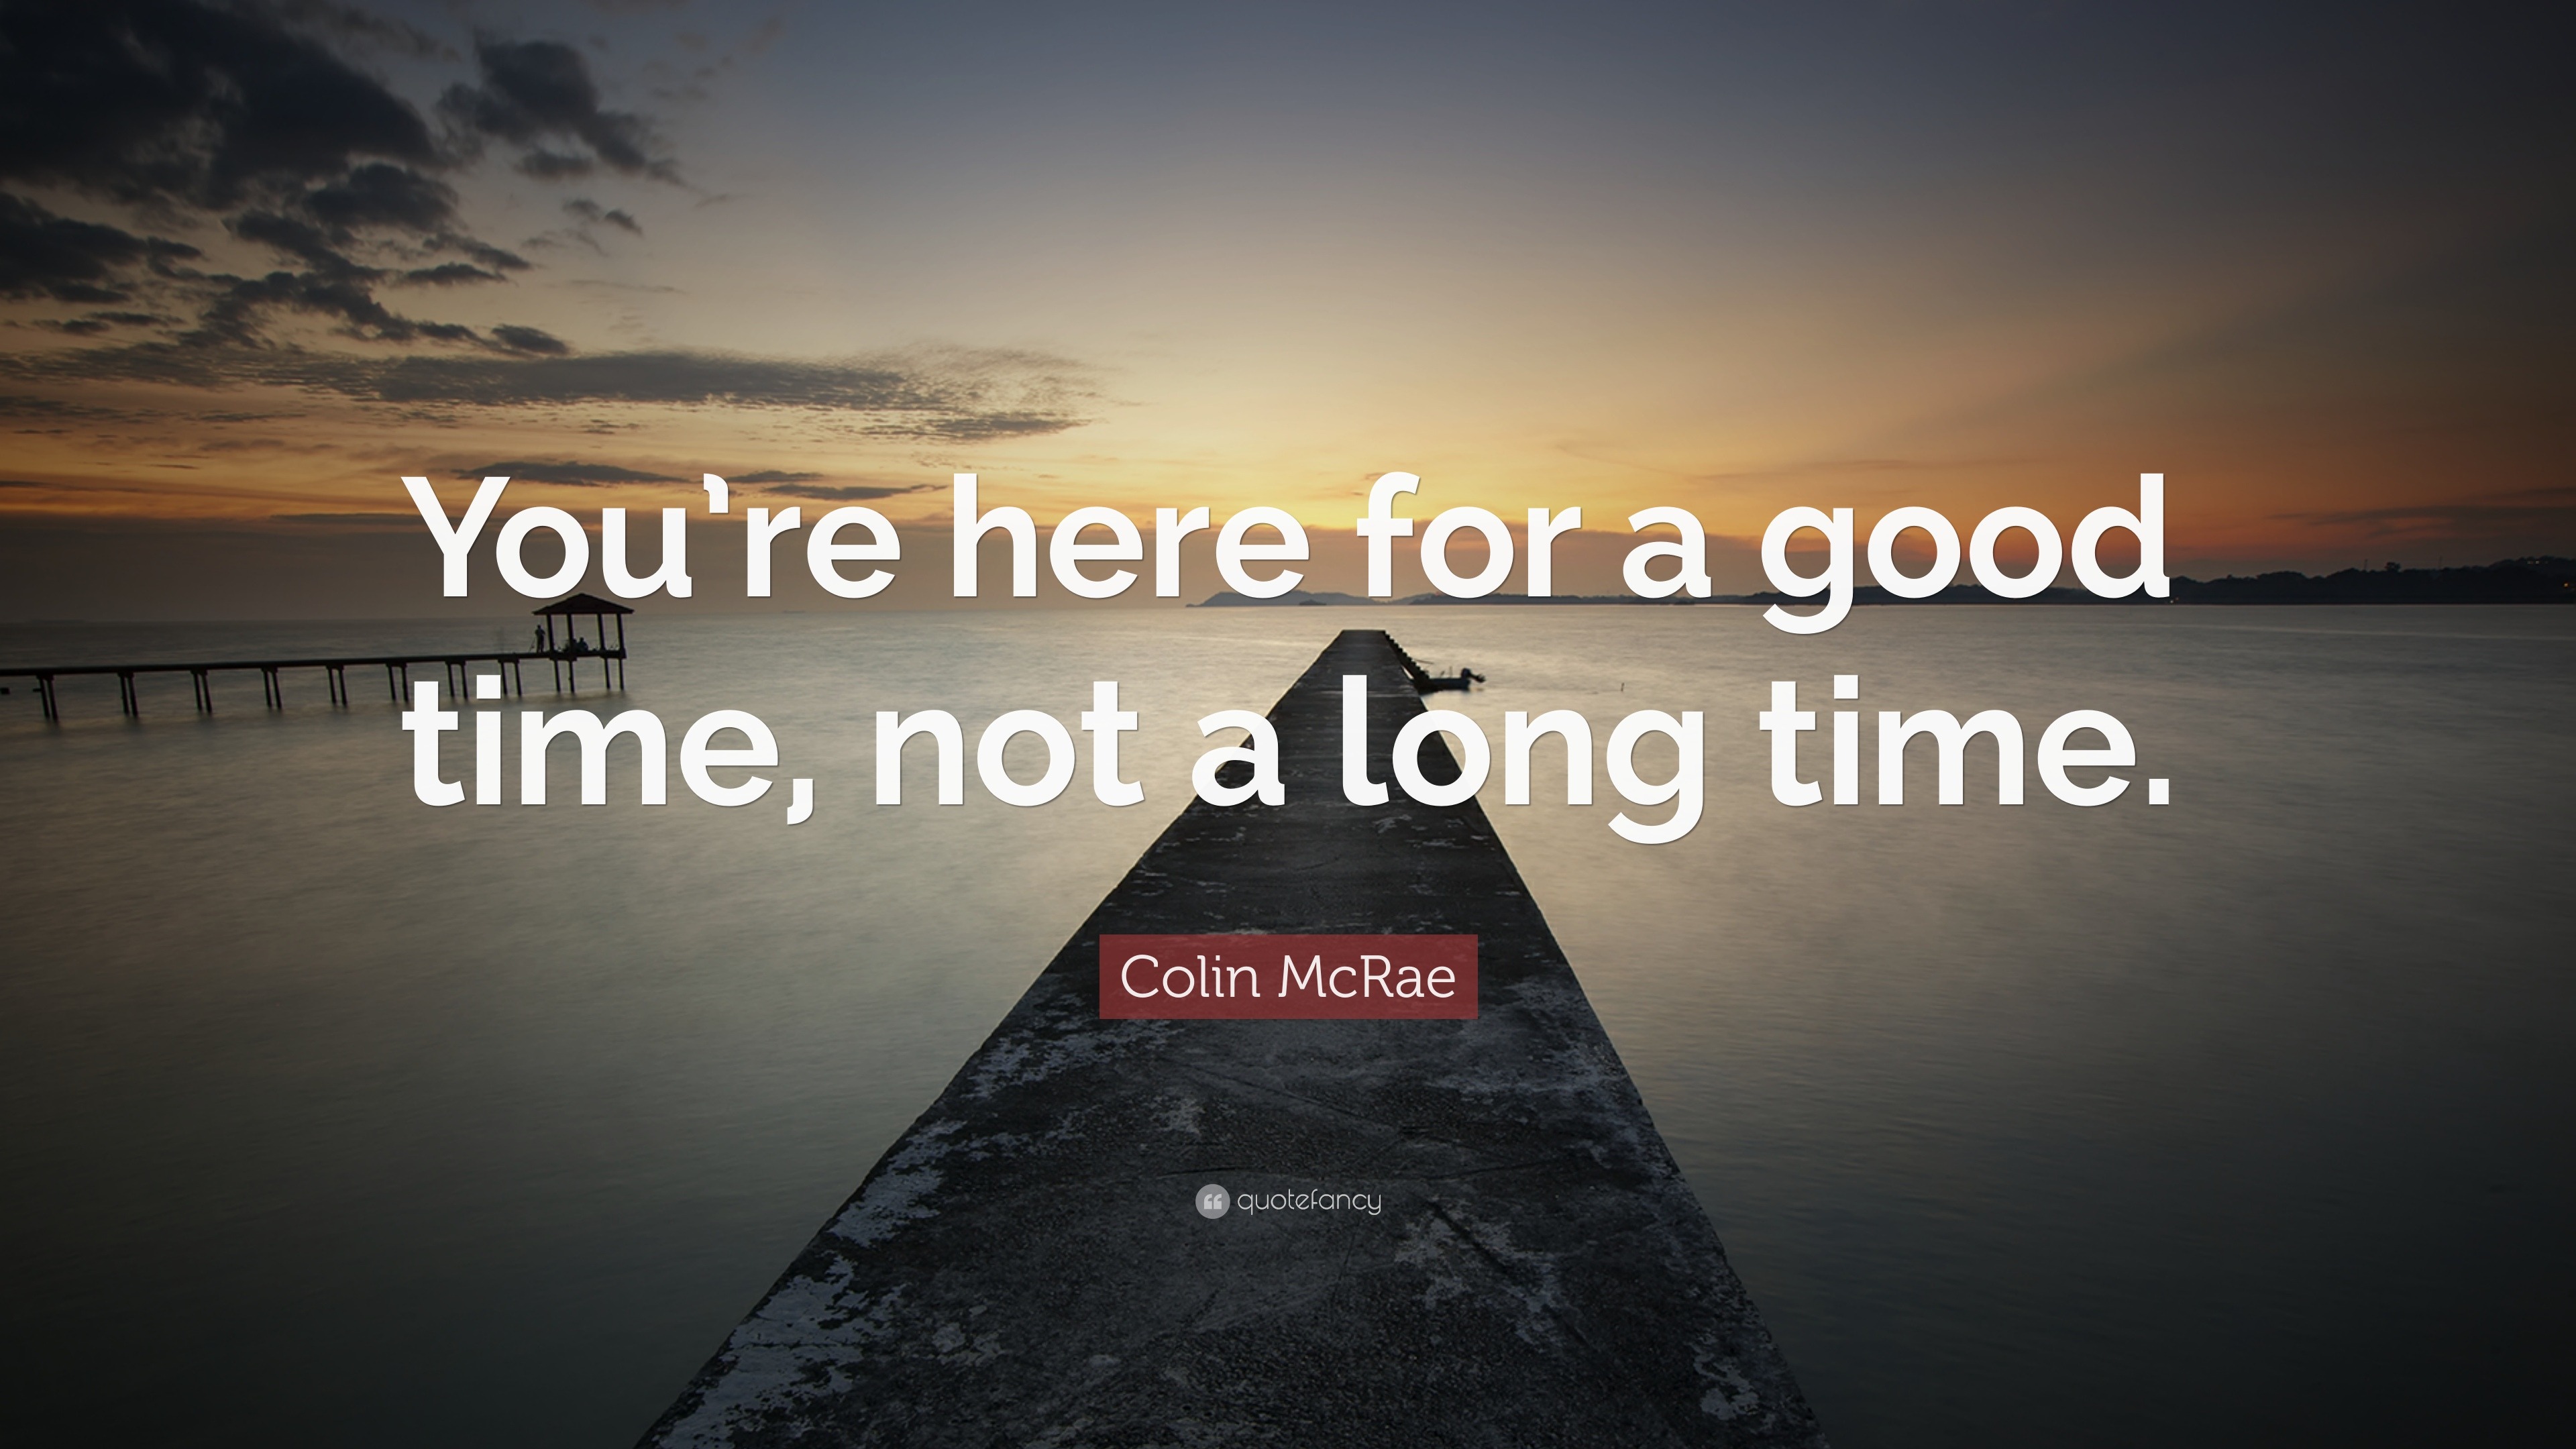 Colin McRae Quote: “You're here for a good time, not a long time.”